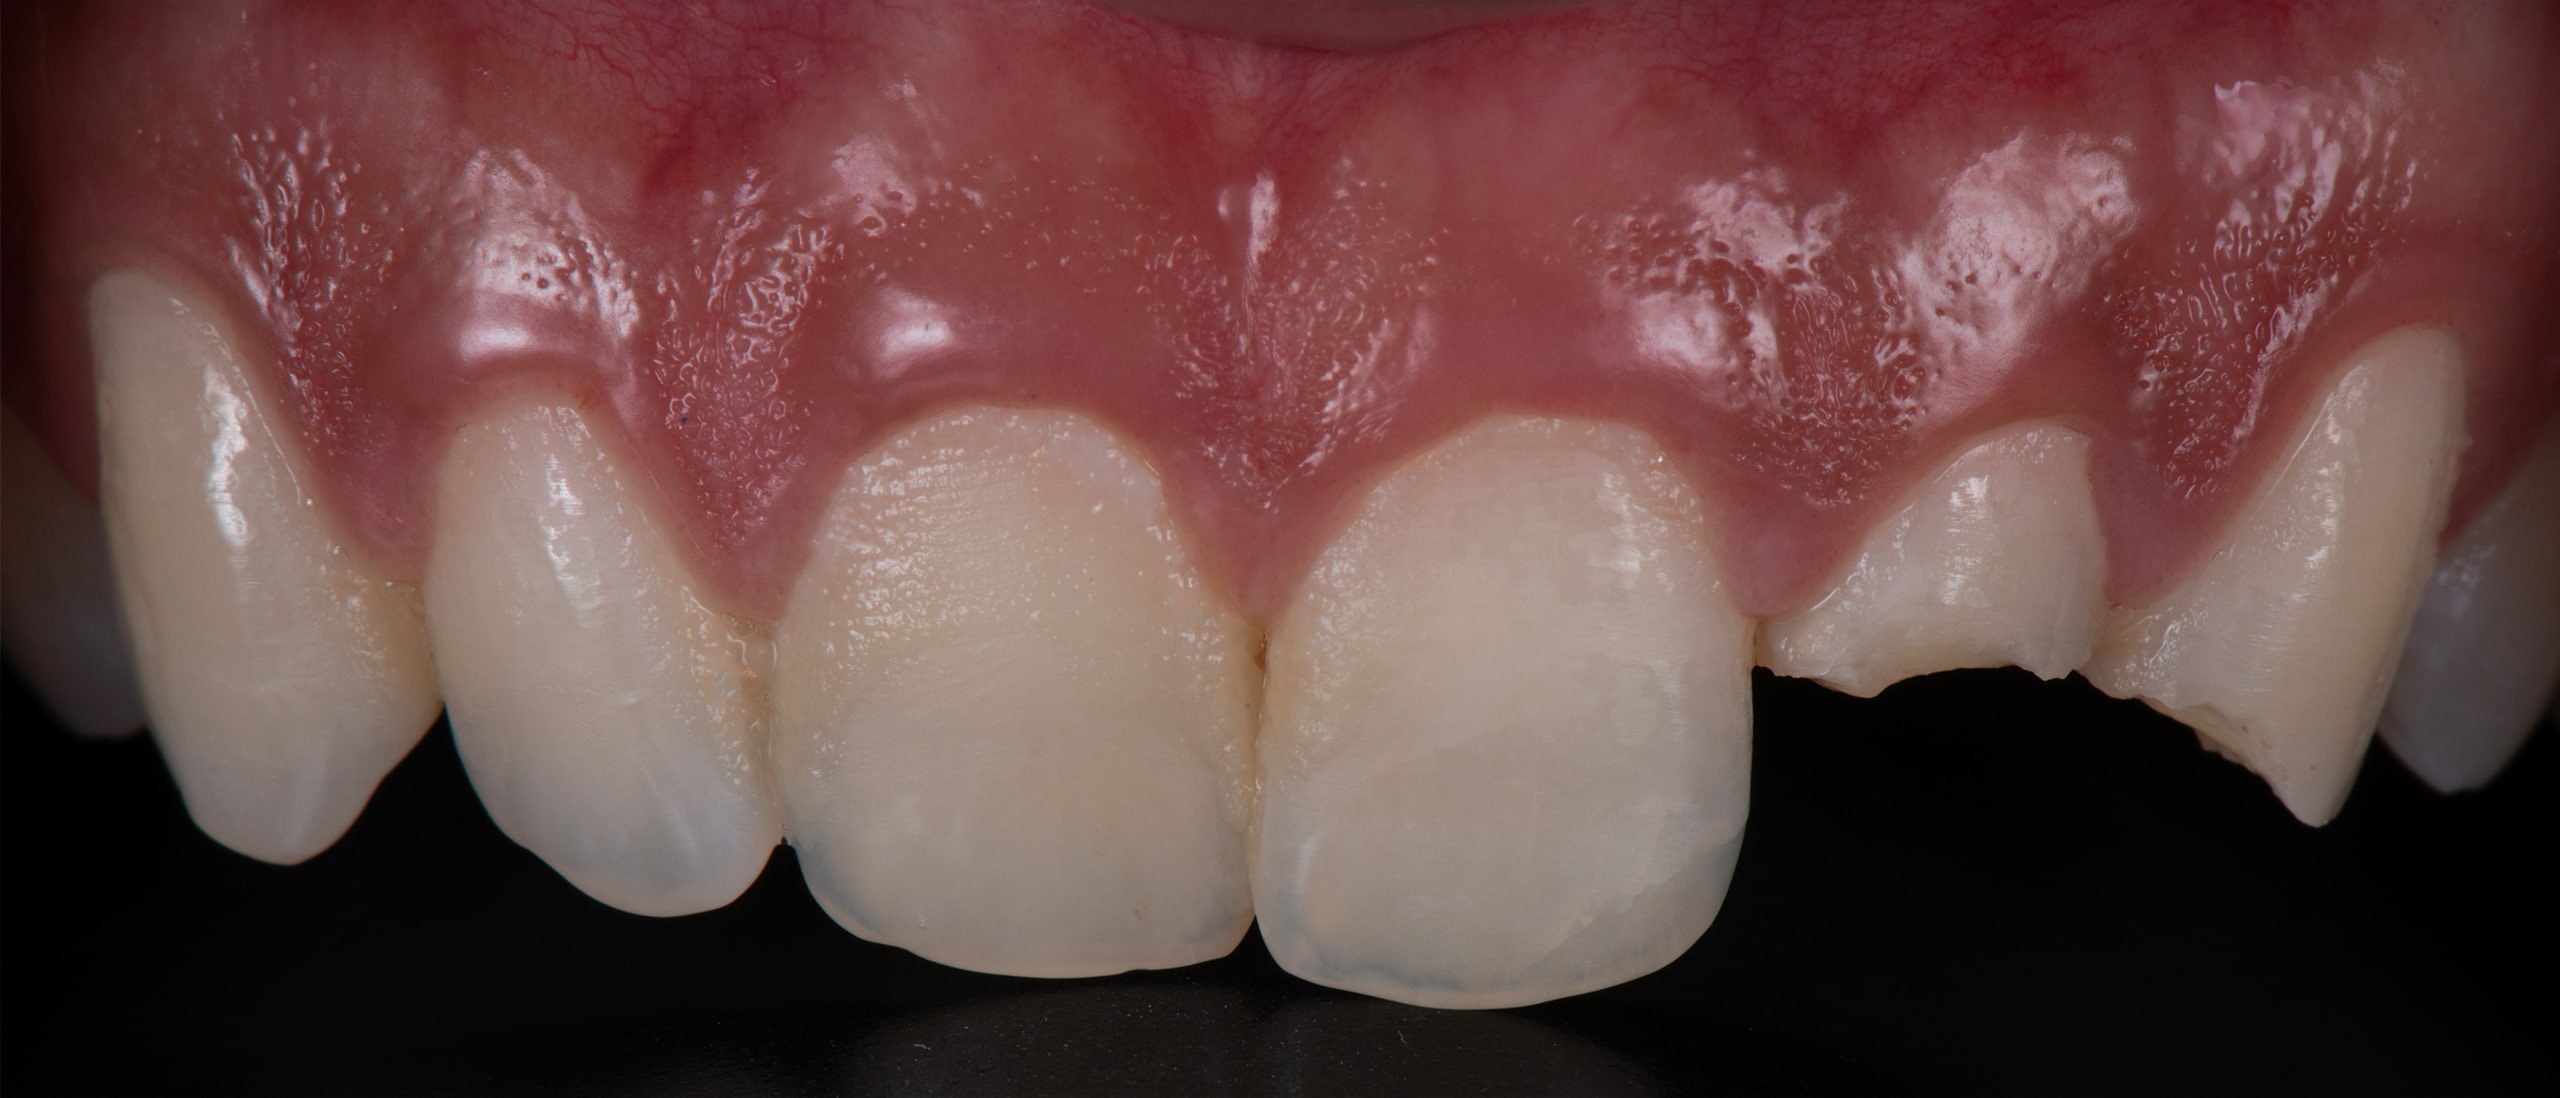 A patient's teeth before conservative dentistry treatment.